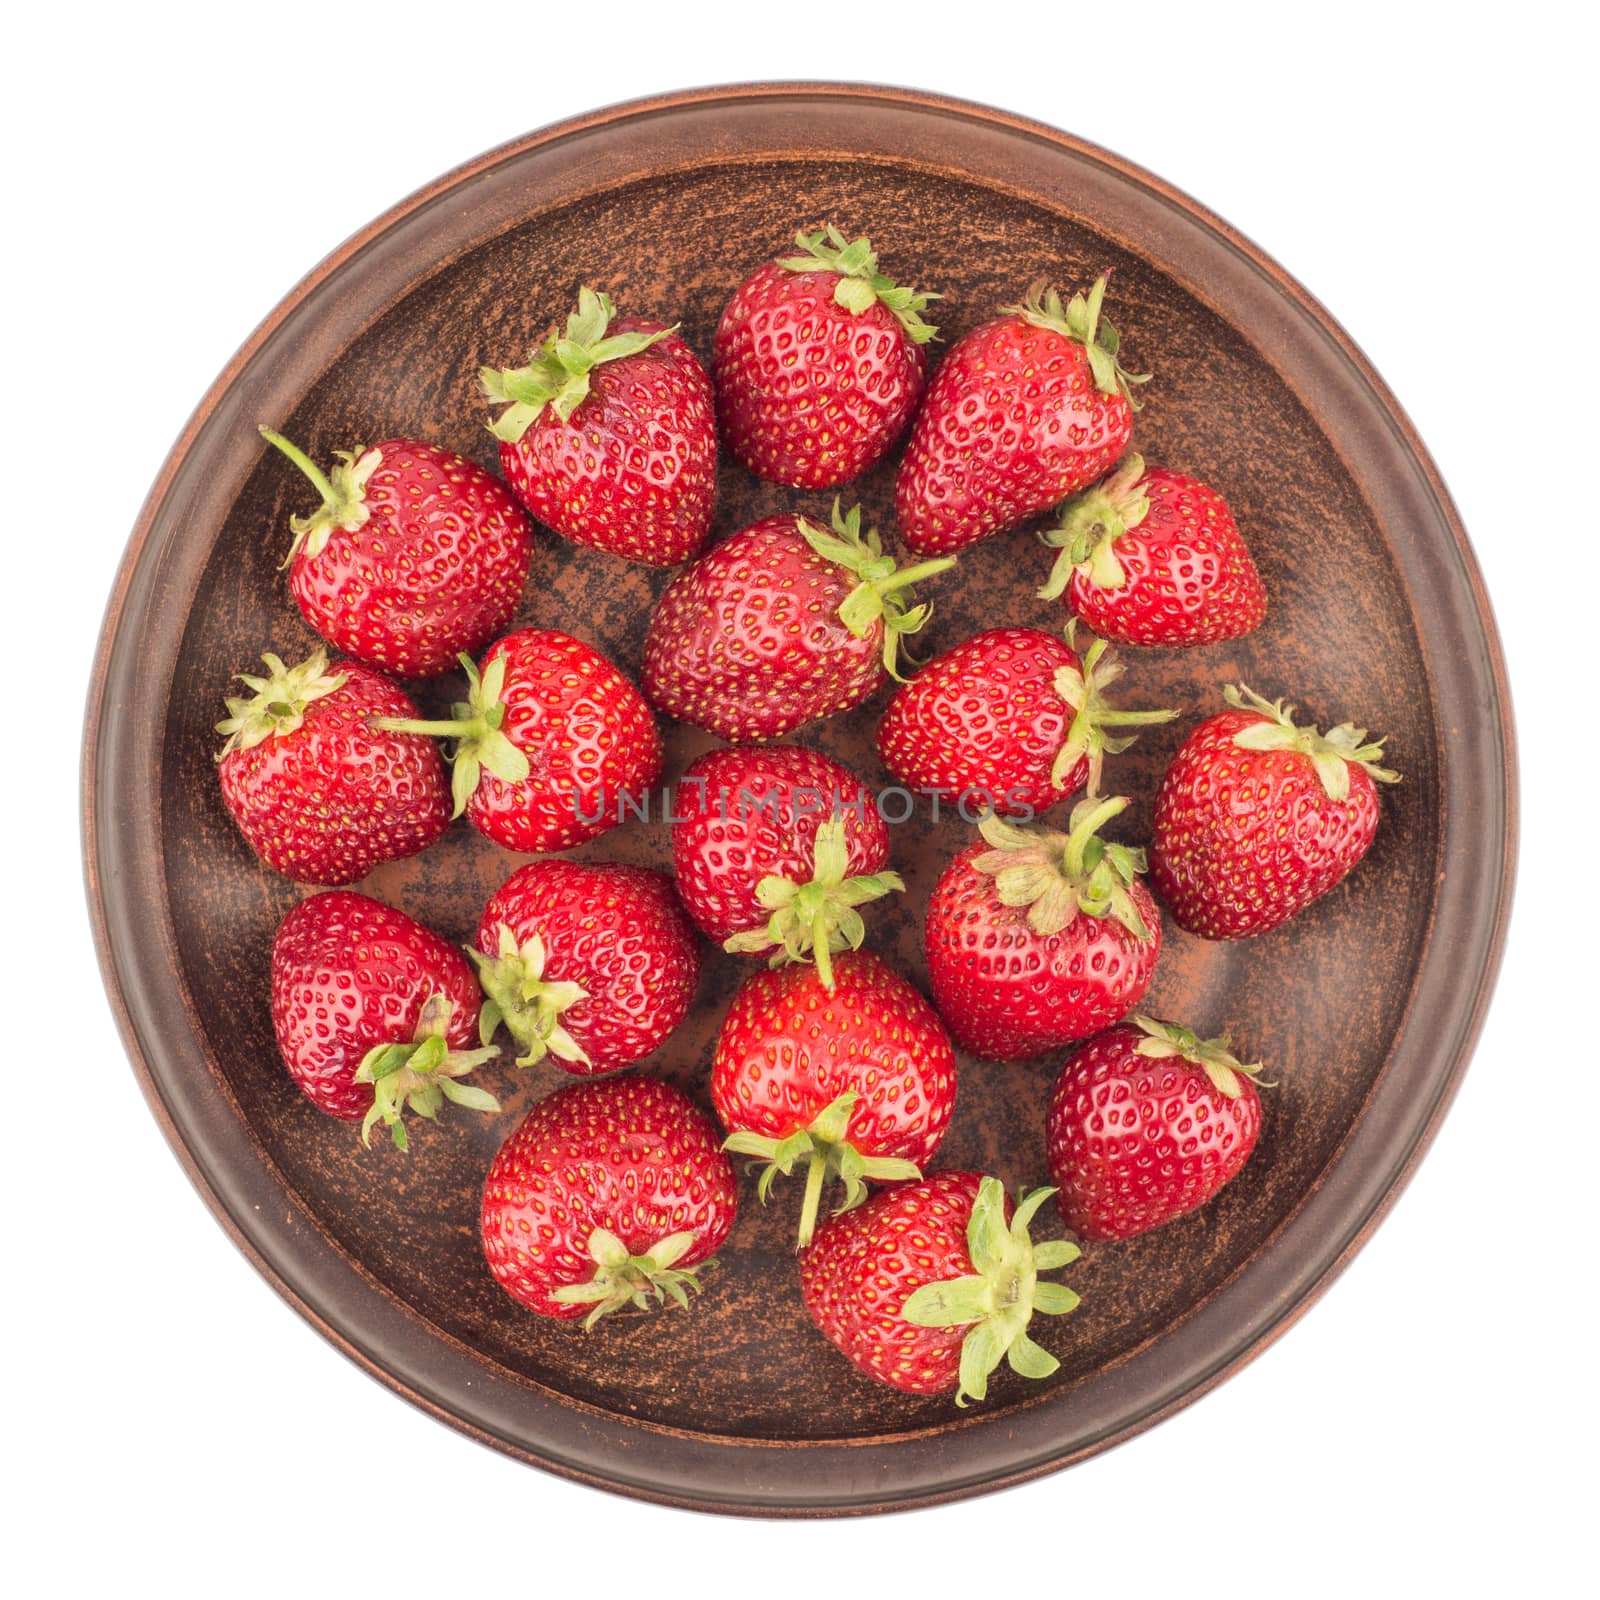 Strawberries in a ceramic plate isolated on white background. Top view.